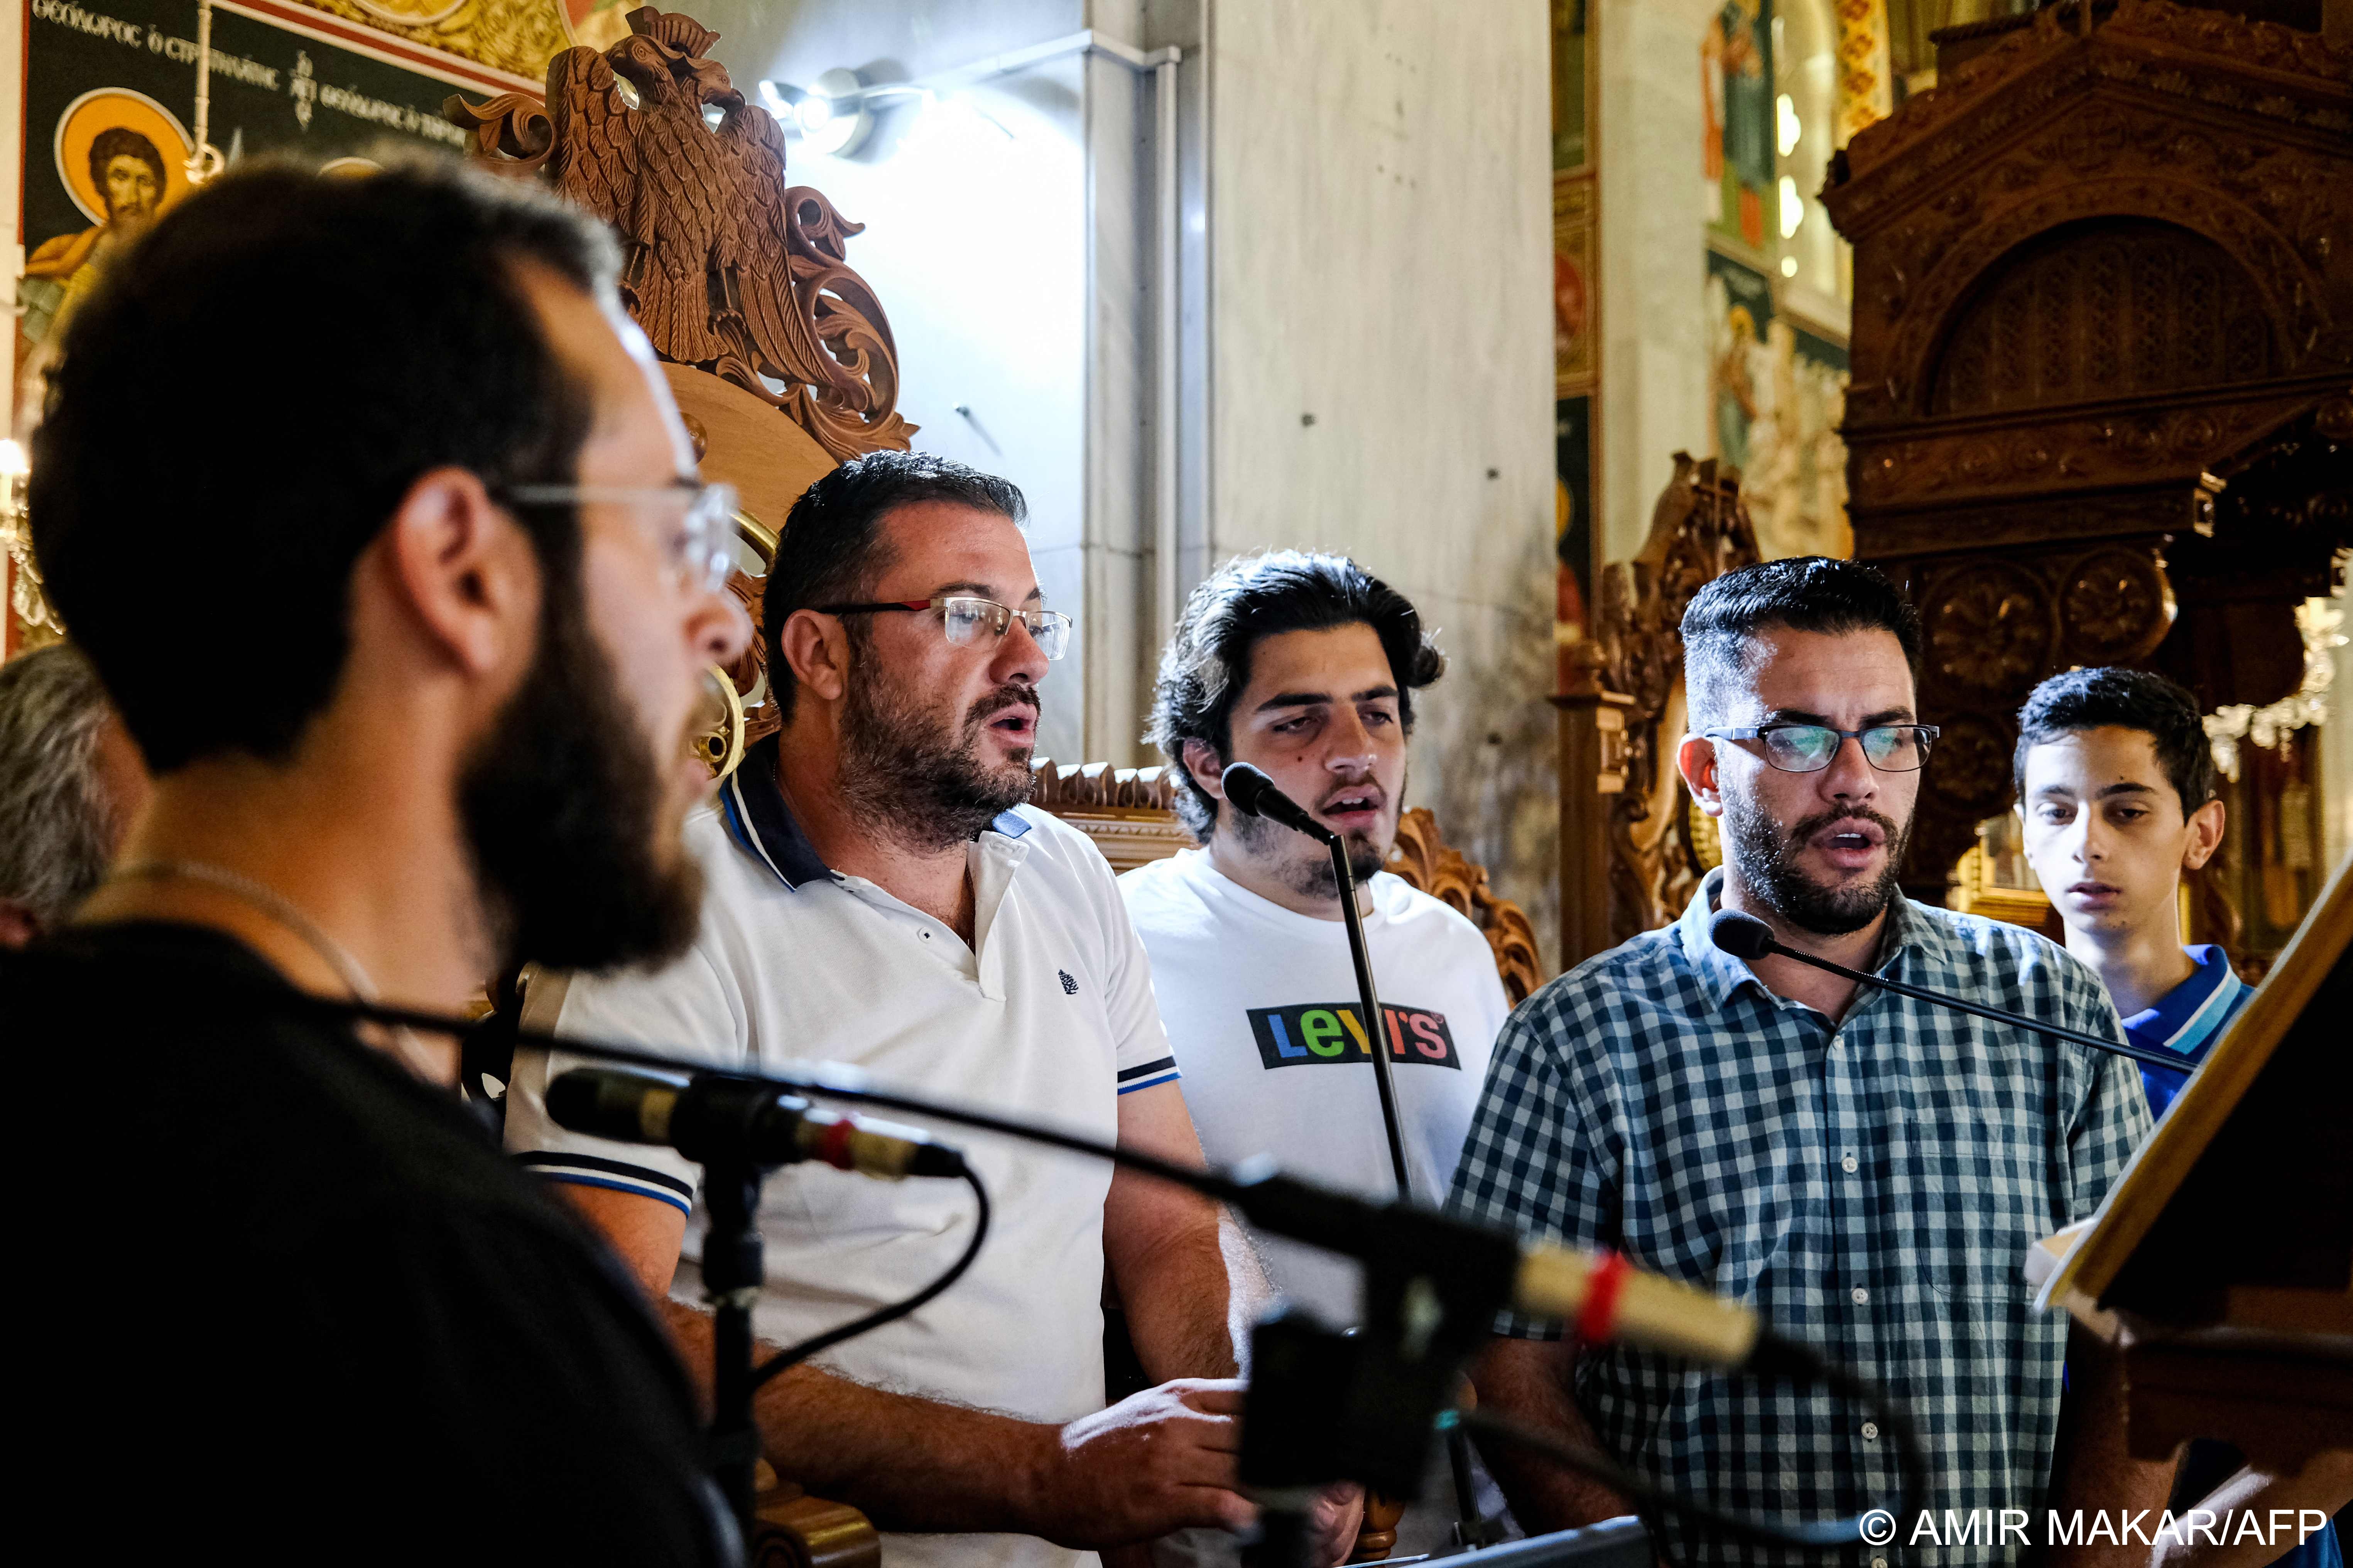 Evaggelos Georgiou (C) leads a group of volunteer chanters during mass at the the Greek Orthodox Church of Chryseleousa Panagia in the village of Athienou, Cyprus, on 8 August 2020 (photo: AFP)